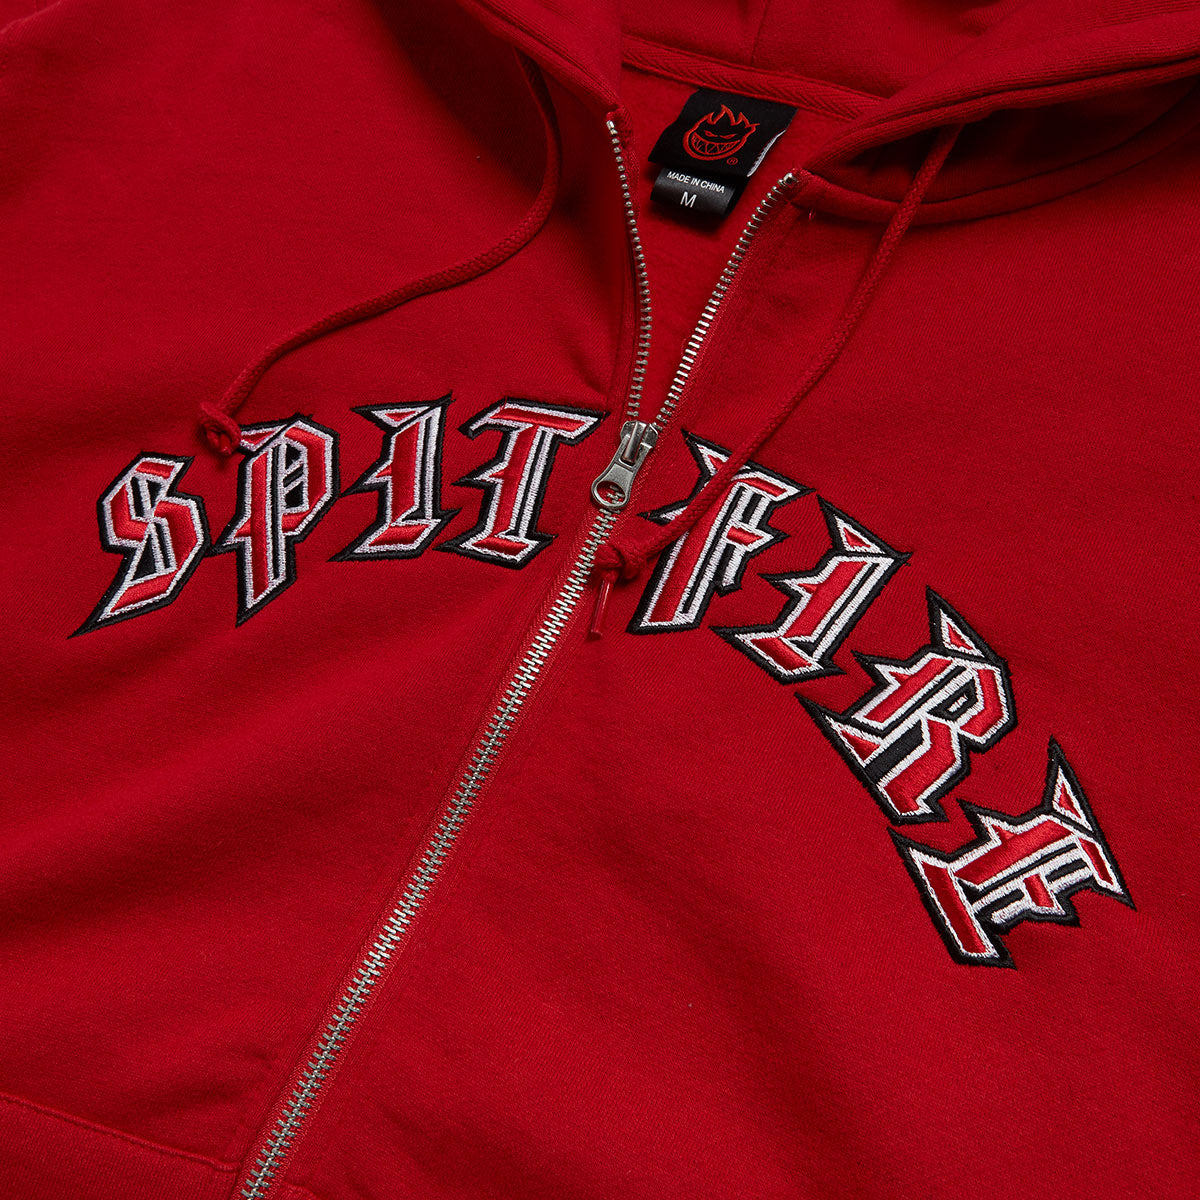 Spitfire Old E Emb Zip Hoodie - Red/Black/Red/White image 2